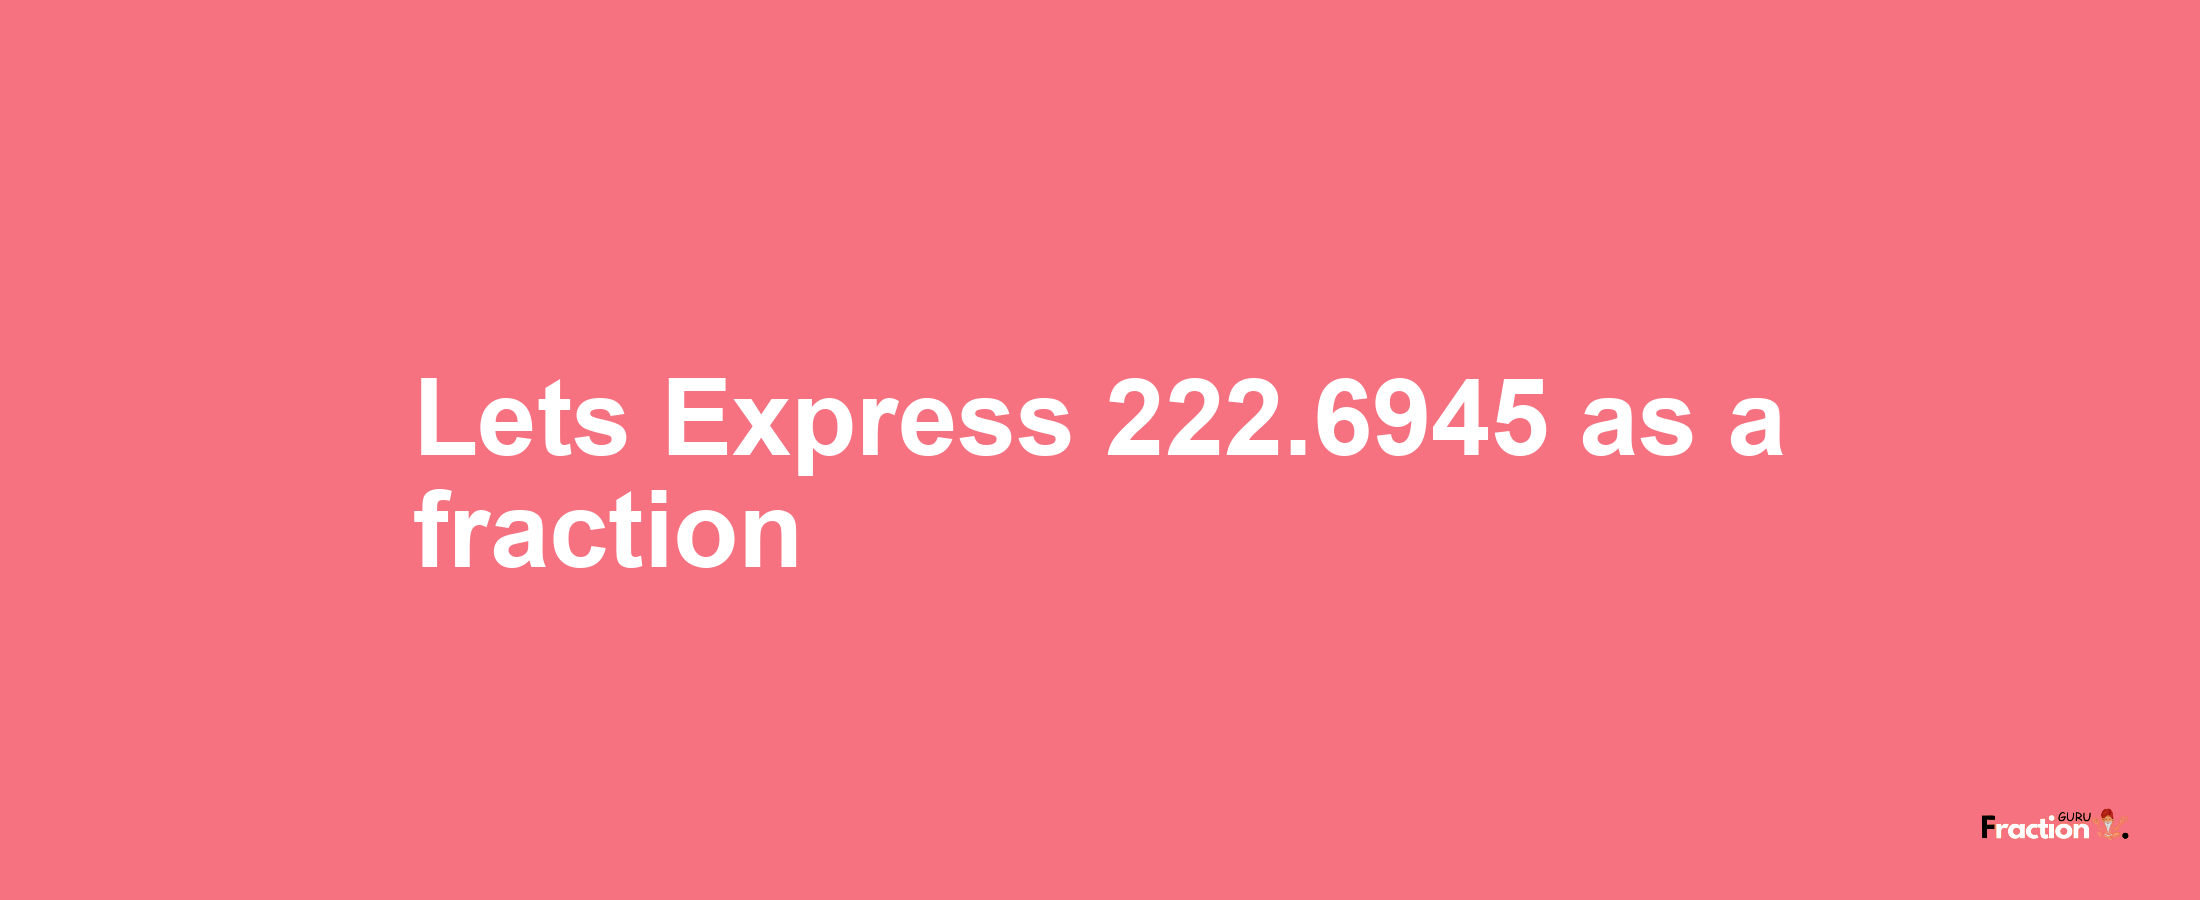 Lets Express 222.6945 as afraction